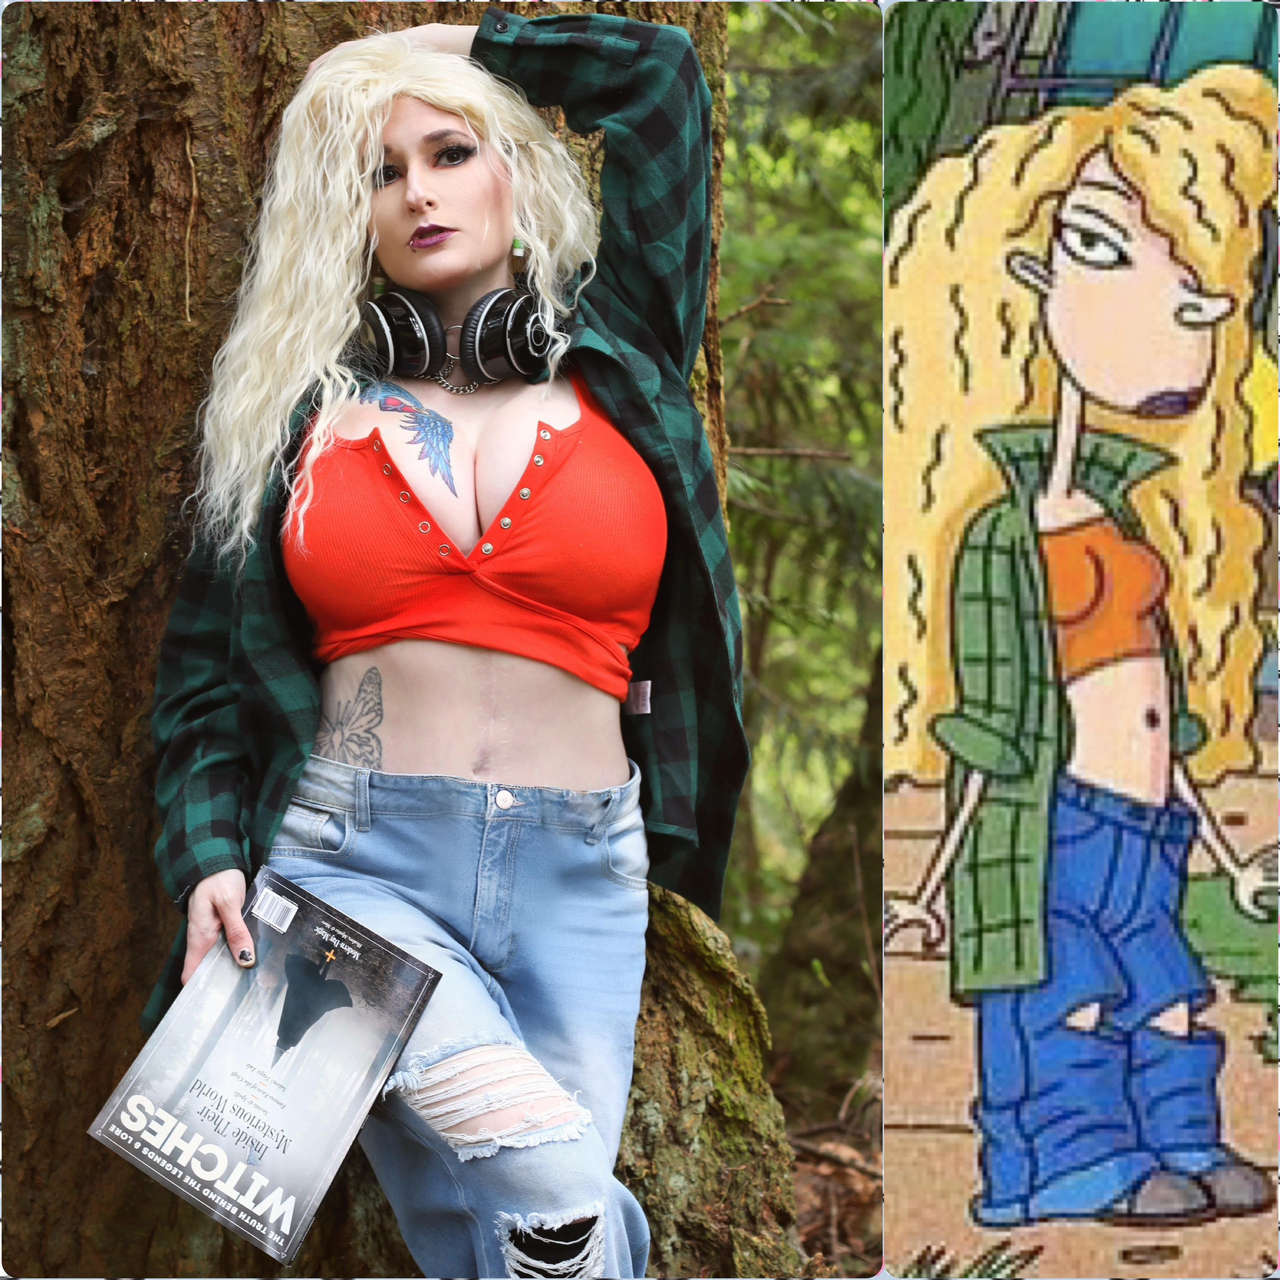 Debbie Thornberry Cosplay From The Wild Thornberrys By Captive Cospla